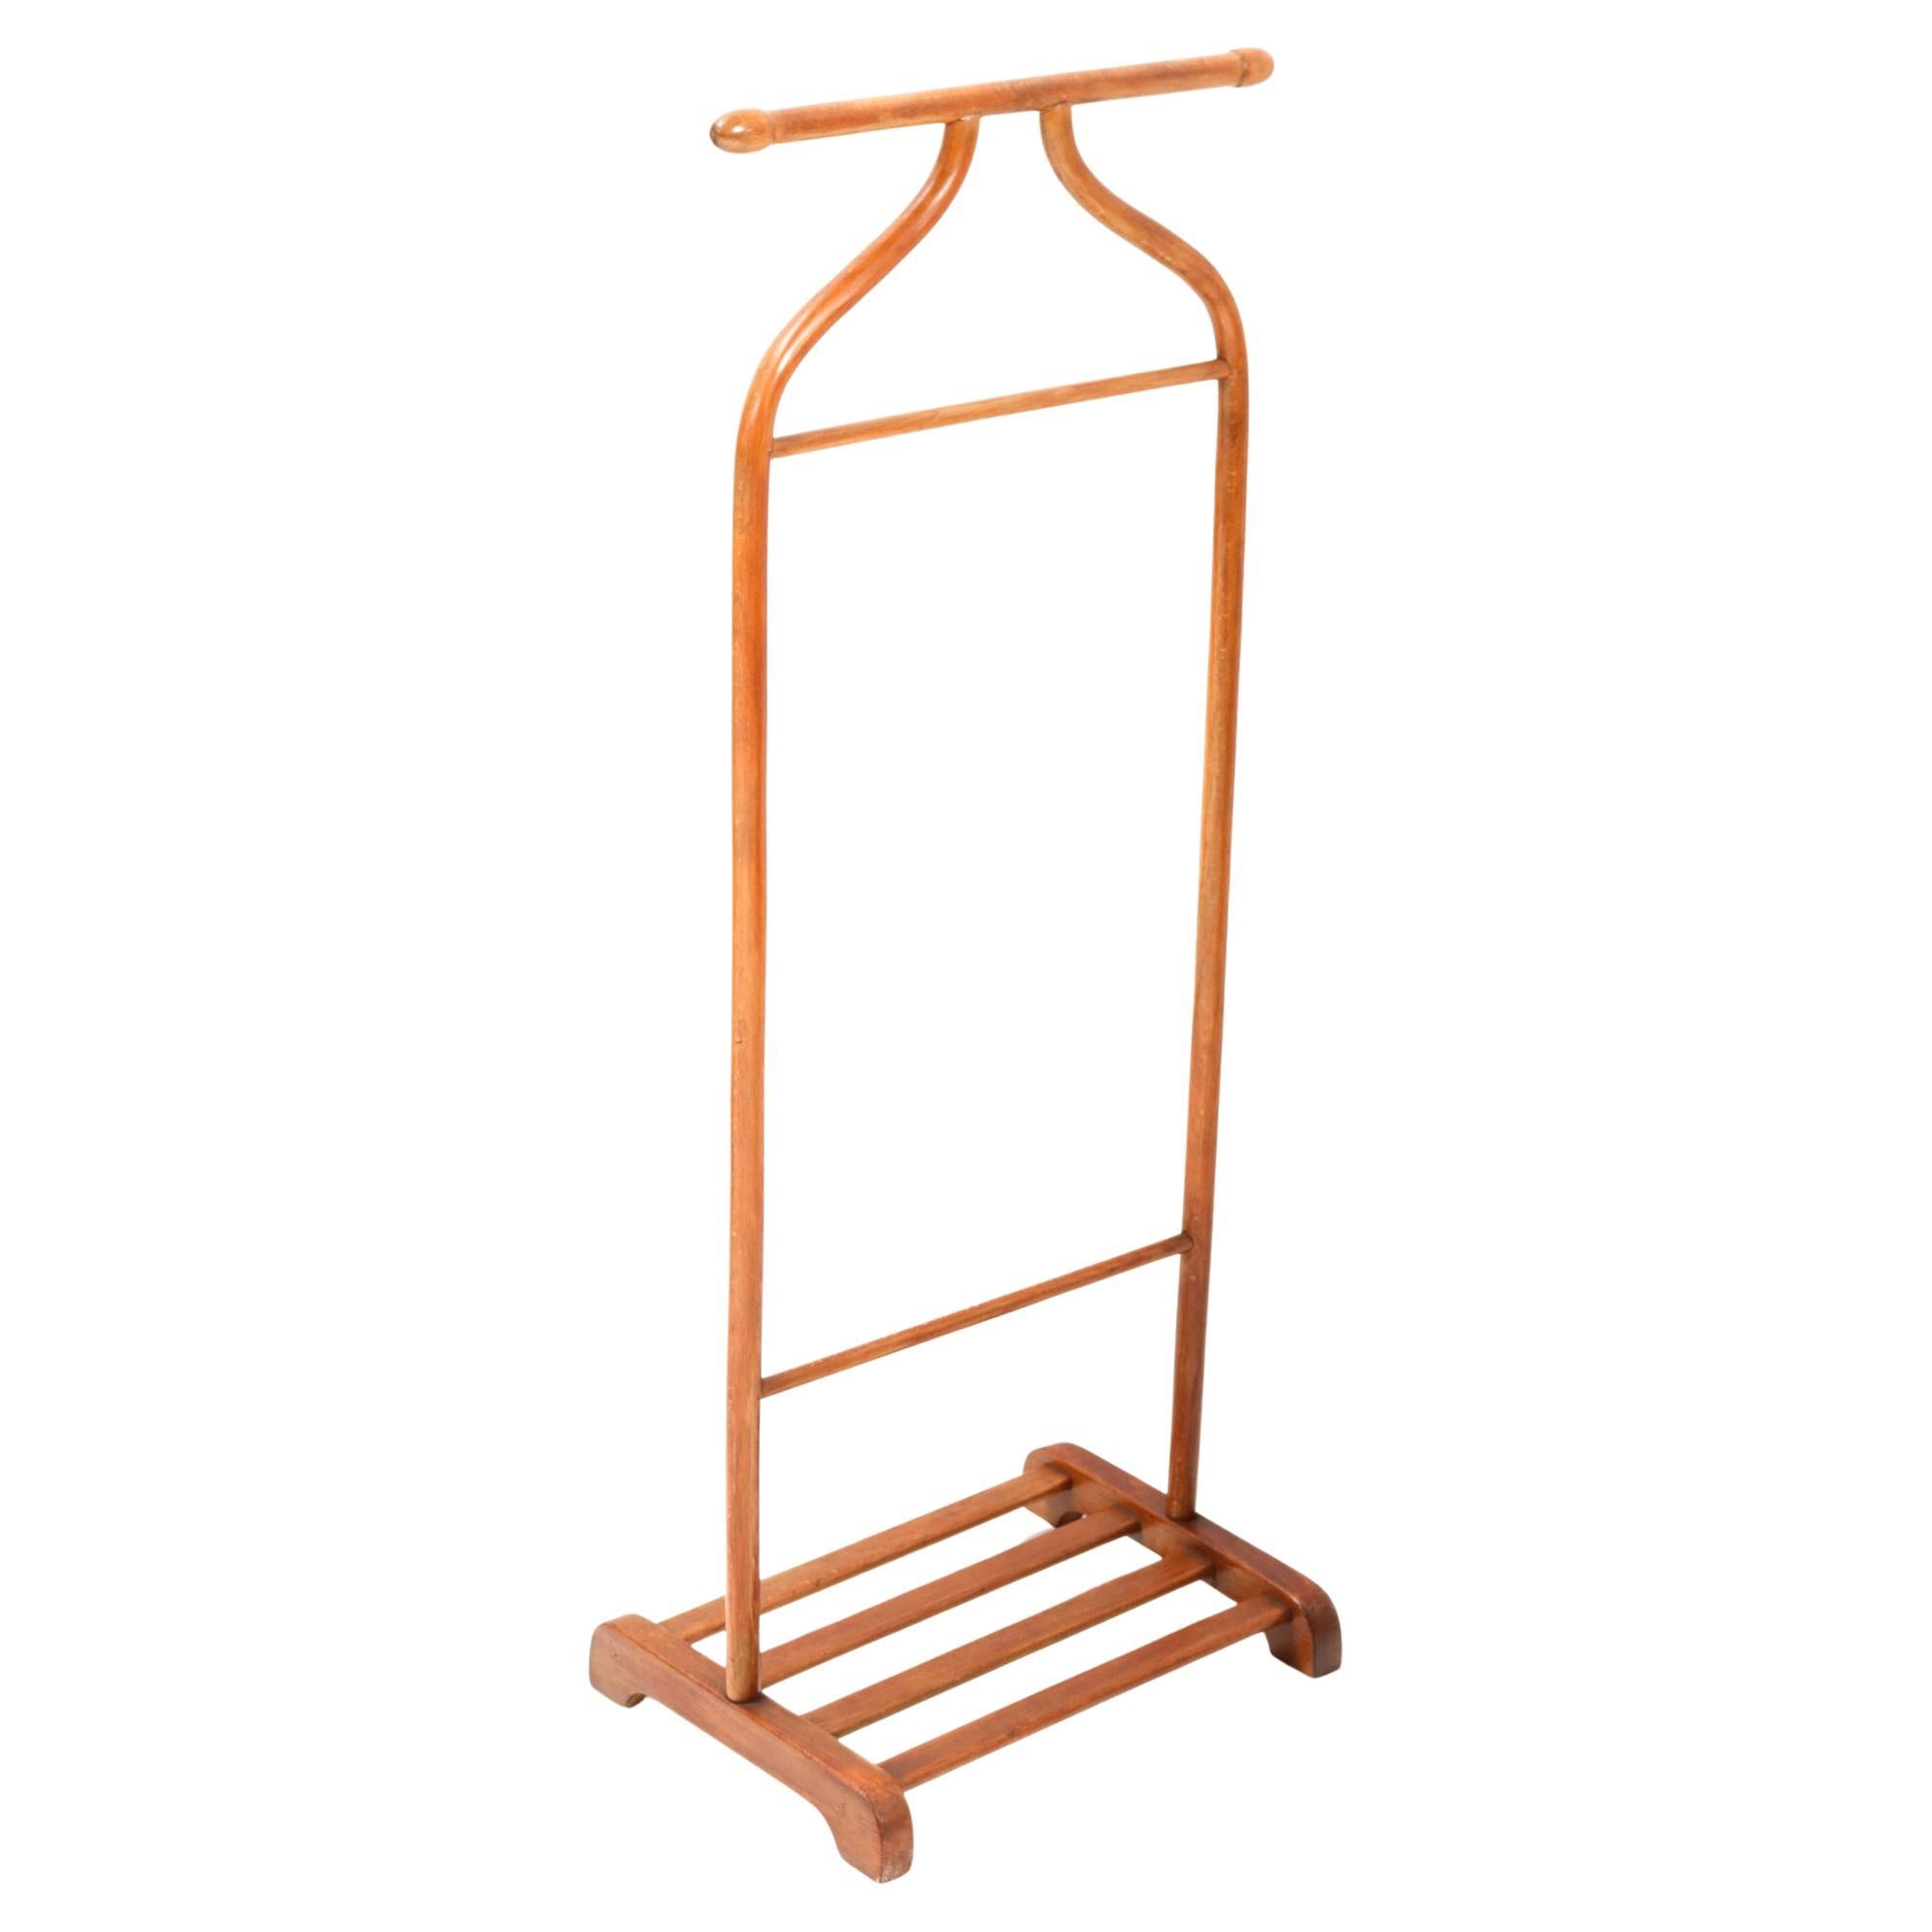 Art Deco Stained Beech Bentwood Valet Stand or Rack by Thonet Vienna, 1920s